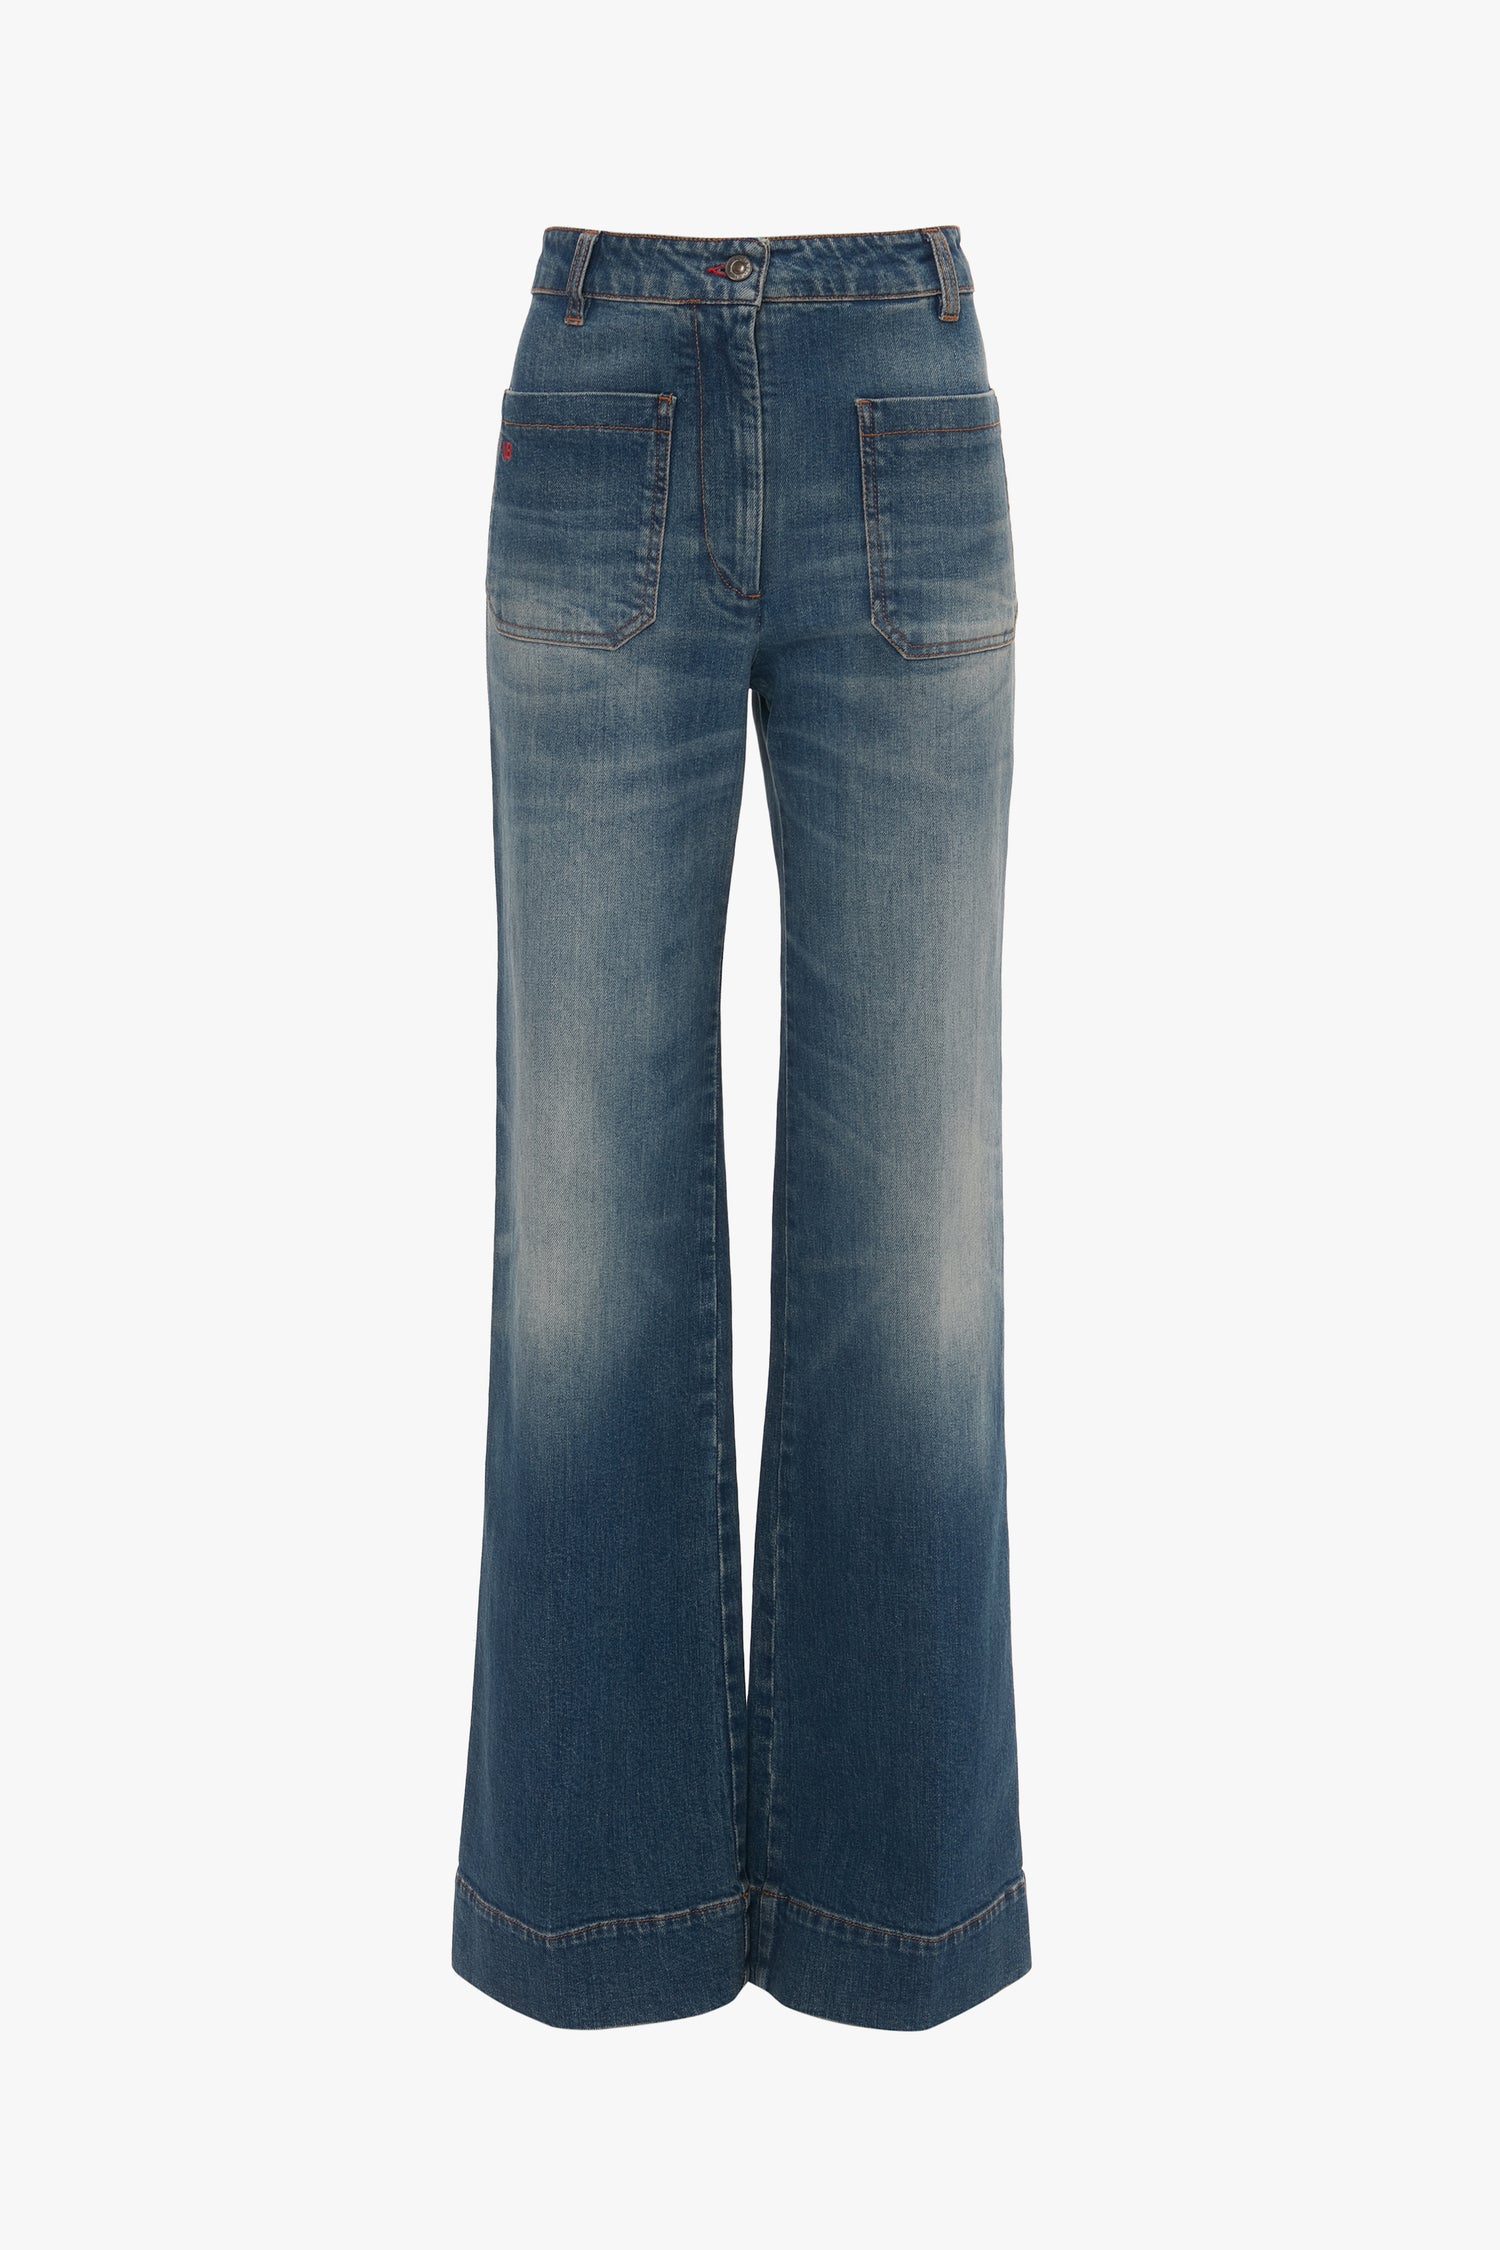 Alina Jean In Heavy Vintage Indigo Wash blue denim wide-leg jeans with front button and zipper, displayed on a white background by Victoria Beckham.